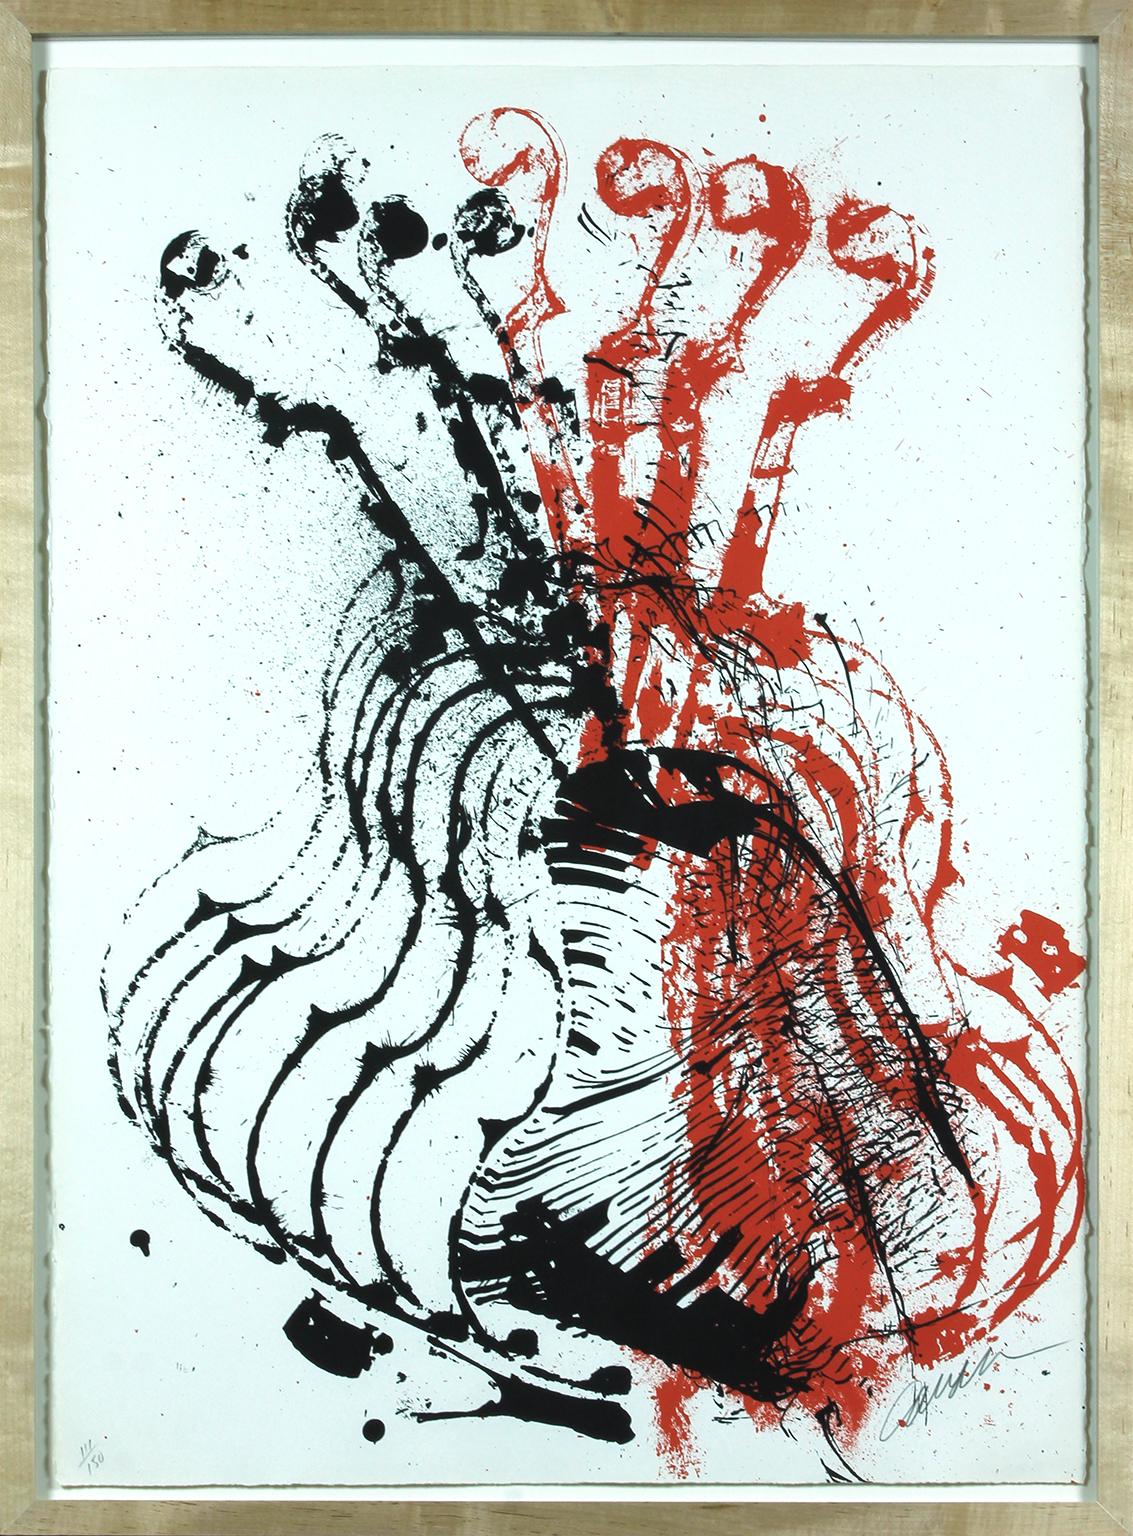 Violins (Red and Black) lithograph  by Arman, Edition 111 of 150